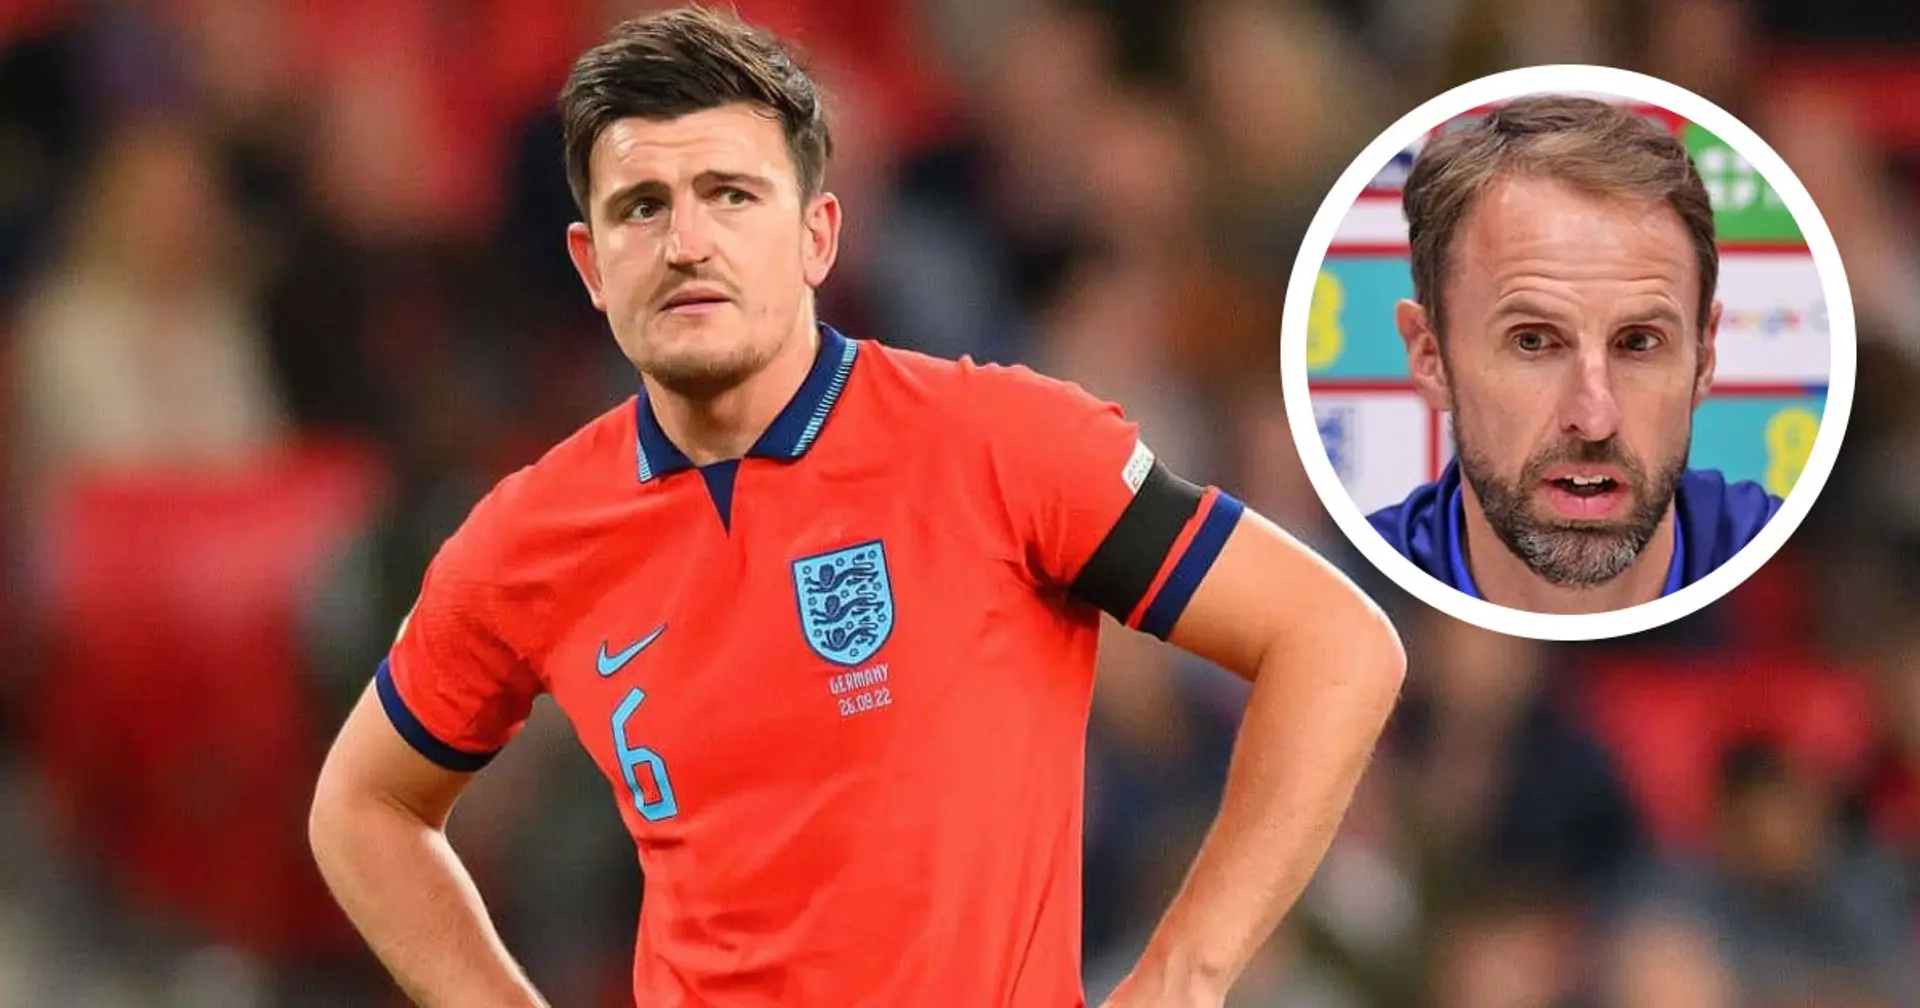 Gareth Southgate: 'We should all really want Maguire playing regularly and playing with confidence’